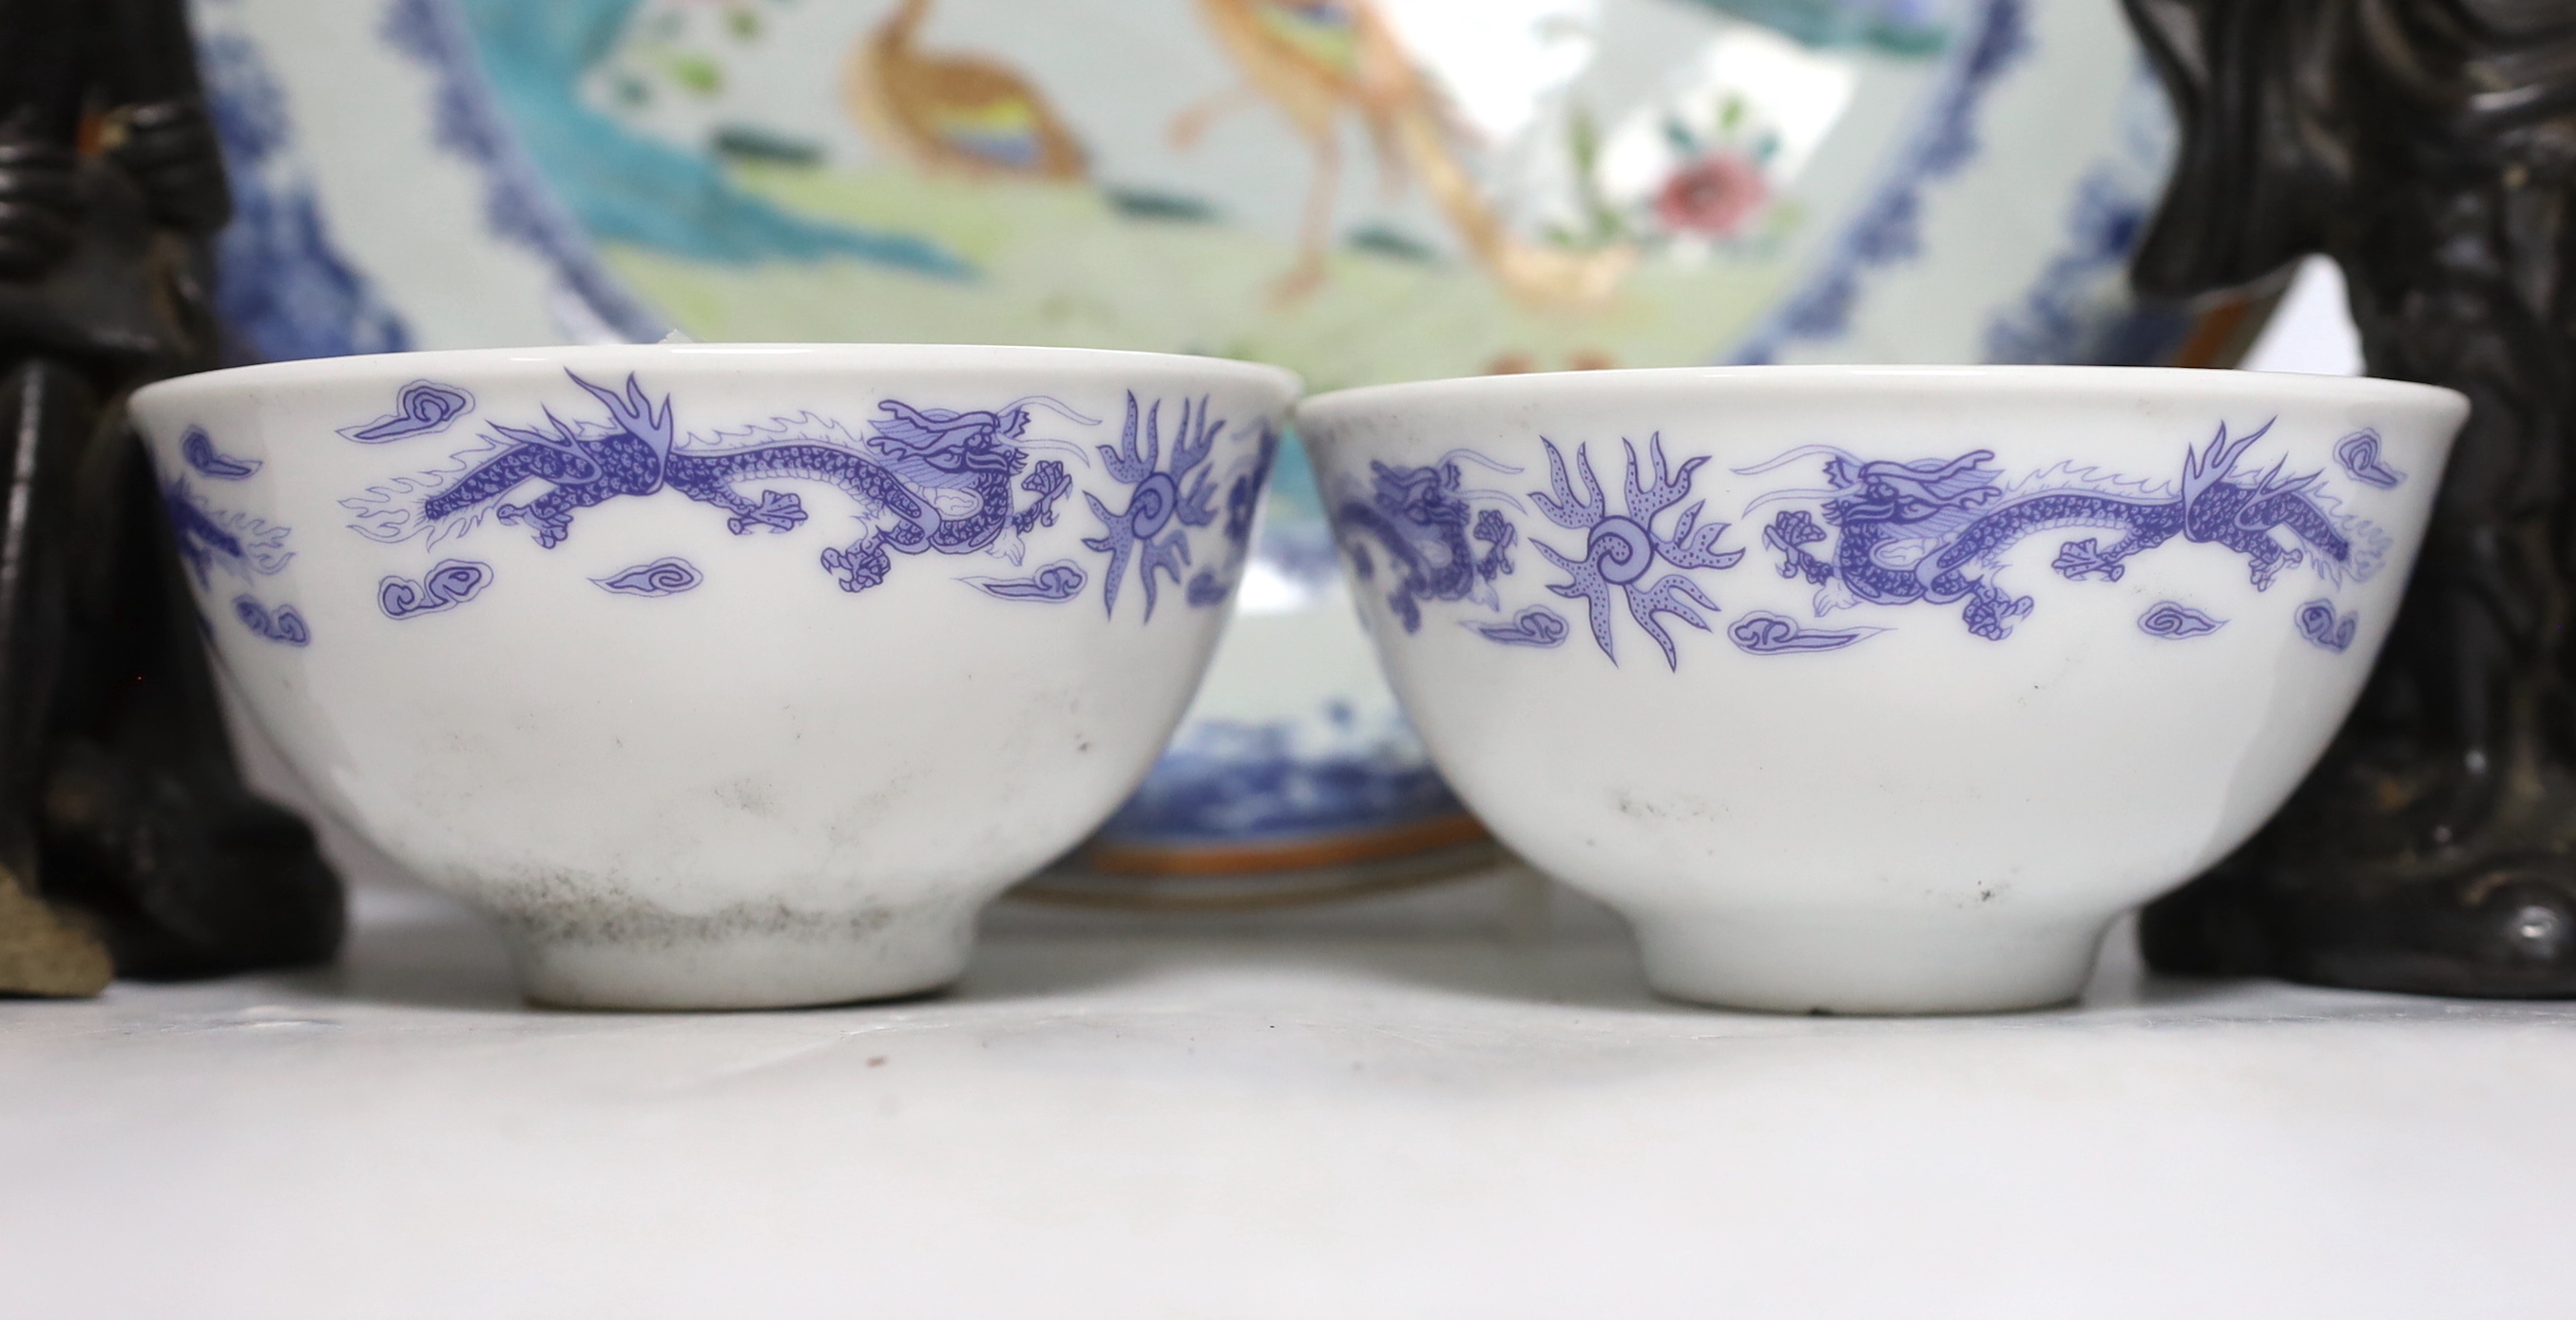 Two Chinese pottery figures of luohan, damaged, 15.5cm and an 18th-century Chinese export famille rose twin pheasant dish and a pair of blue and white bowls, the largest 30cm in diameter